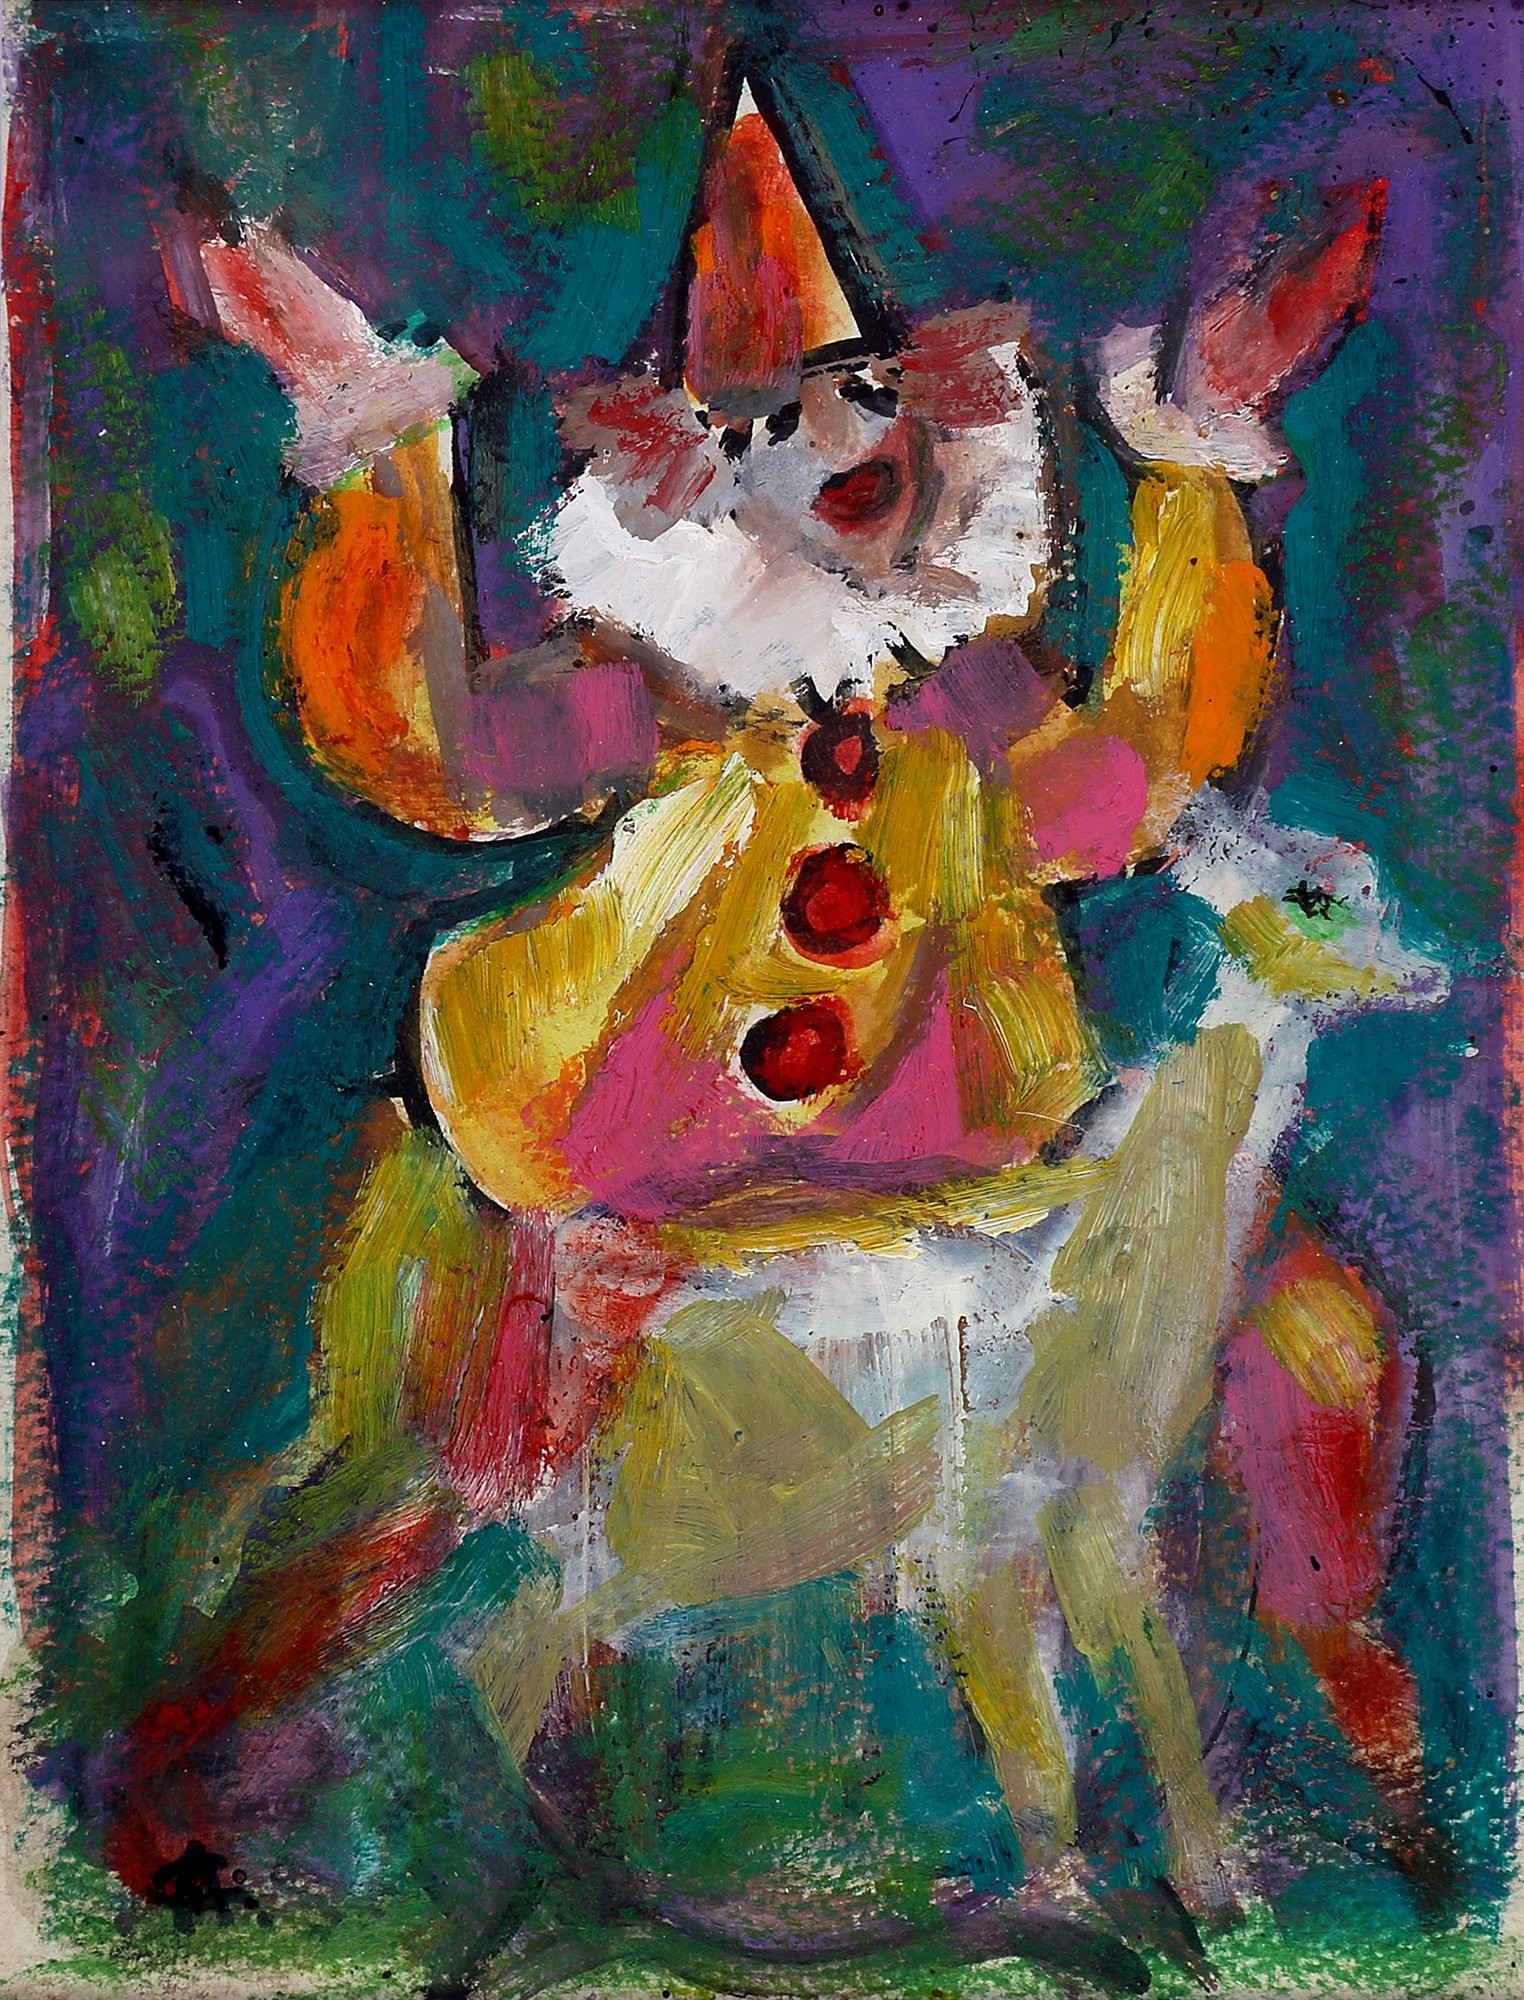 From the "Circus" series